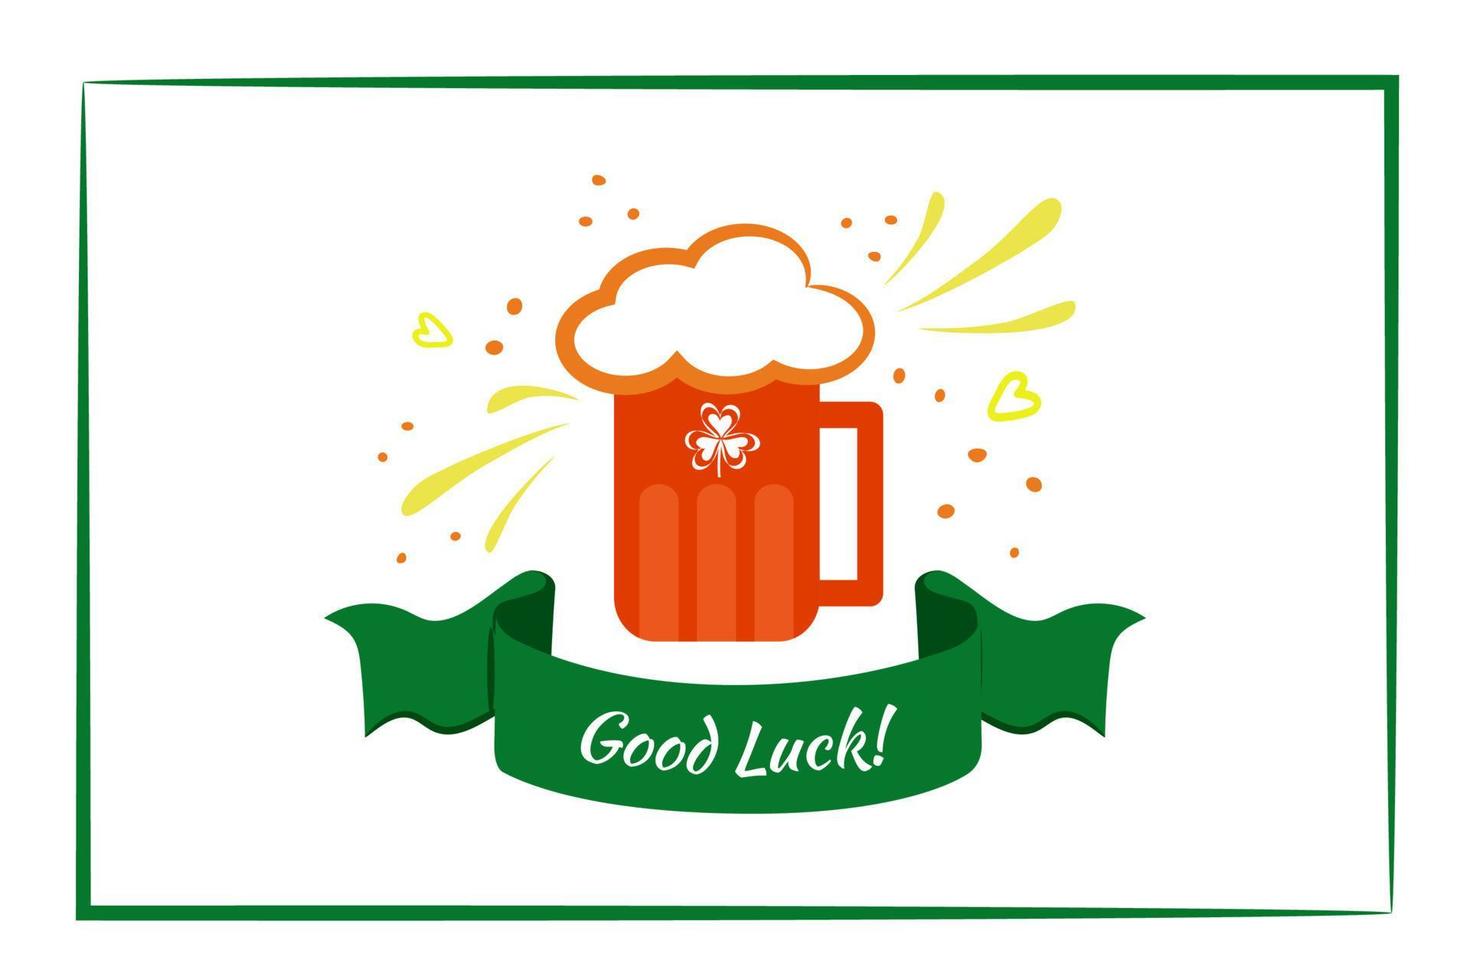 Wish of good luck, toast for Irish party, celebration, written on elegant green ribbon. Orange beer mug with rich foam and shamrock design. Simple sketch, festive print in colors of Irish flag vector